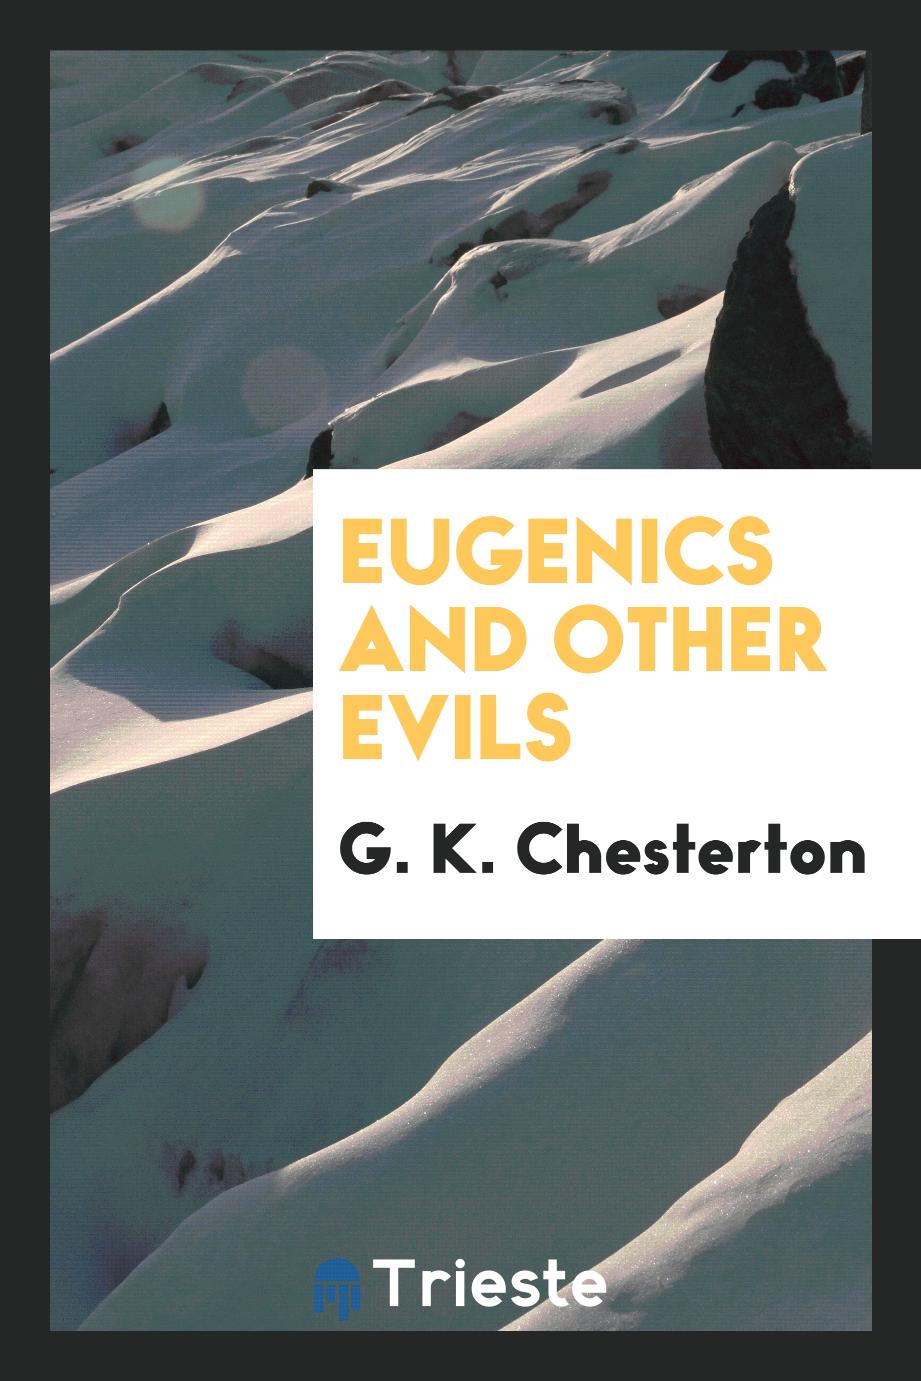 Eugenics and other evils